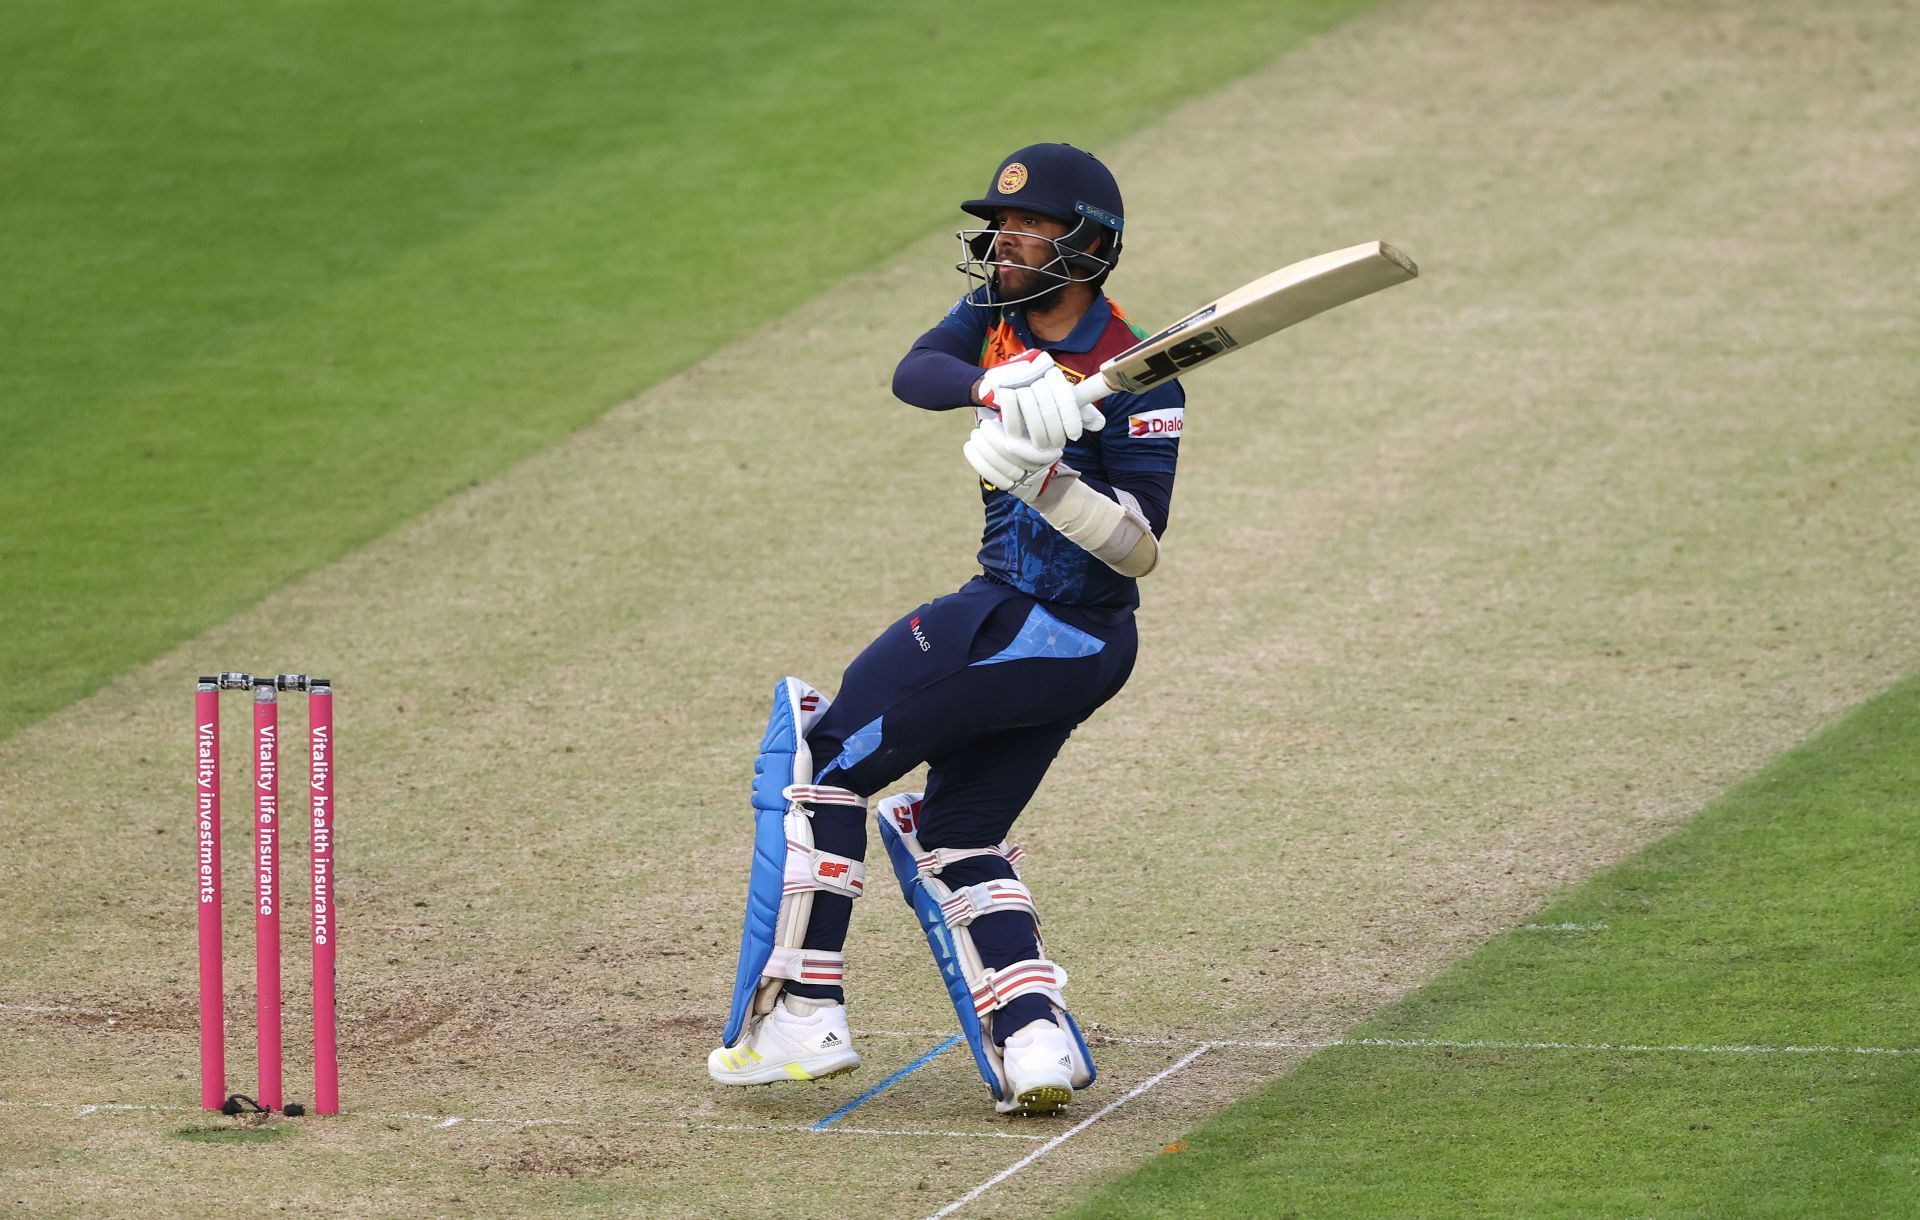 Kusal Mendis in action during the England v Sri Lanka - T20 International Series Second T20I (Image: Getty)